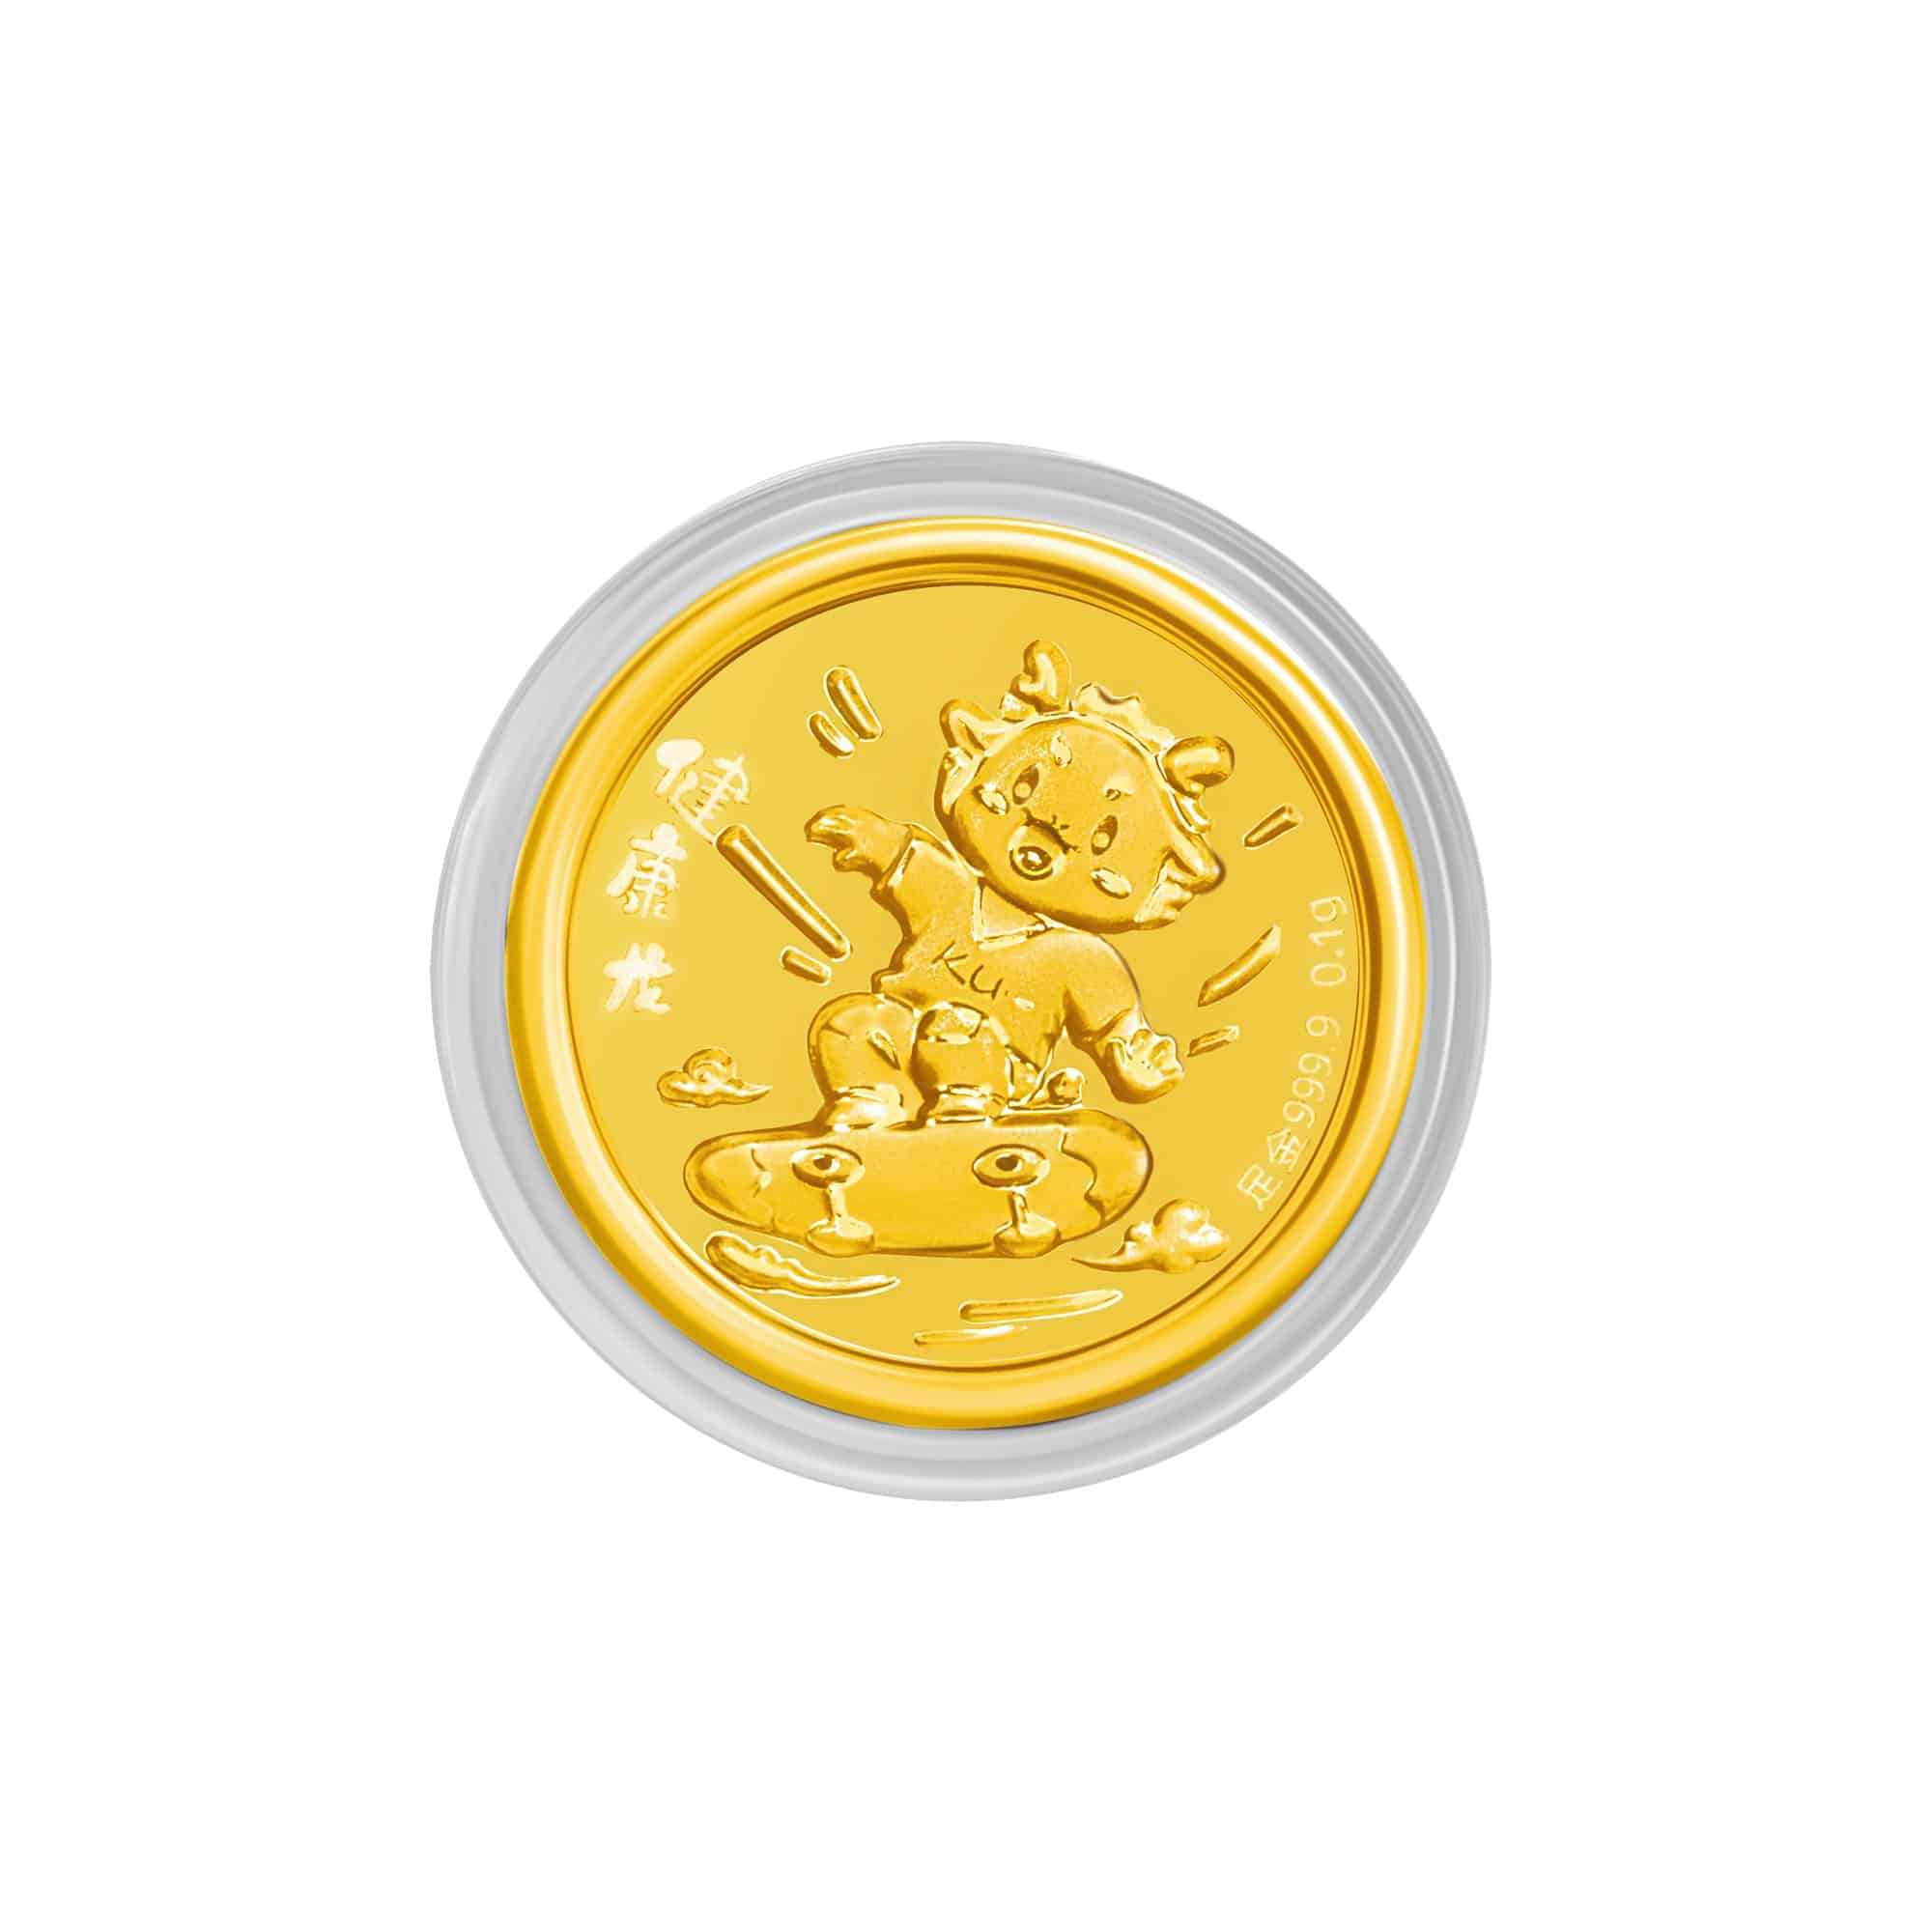 Vitality Dragon Coin in 999 Gold